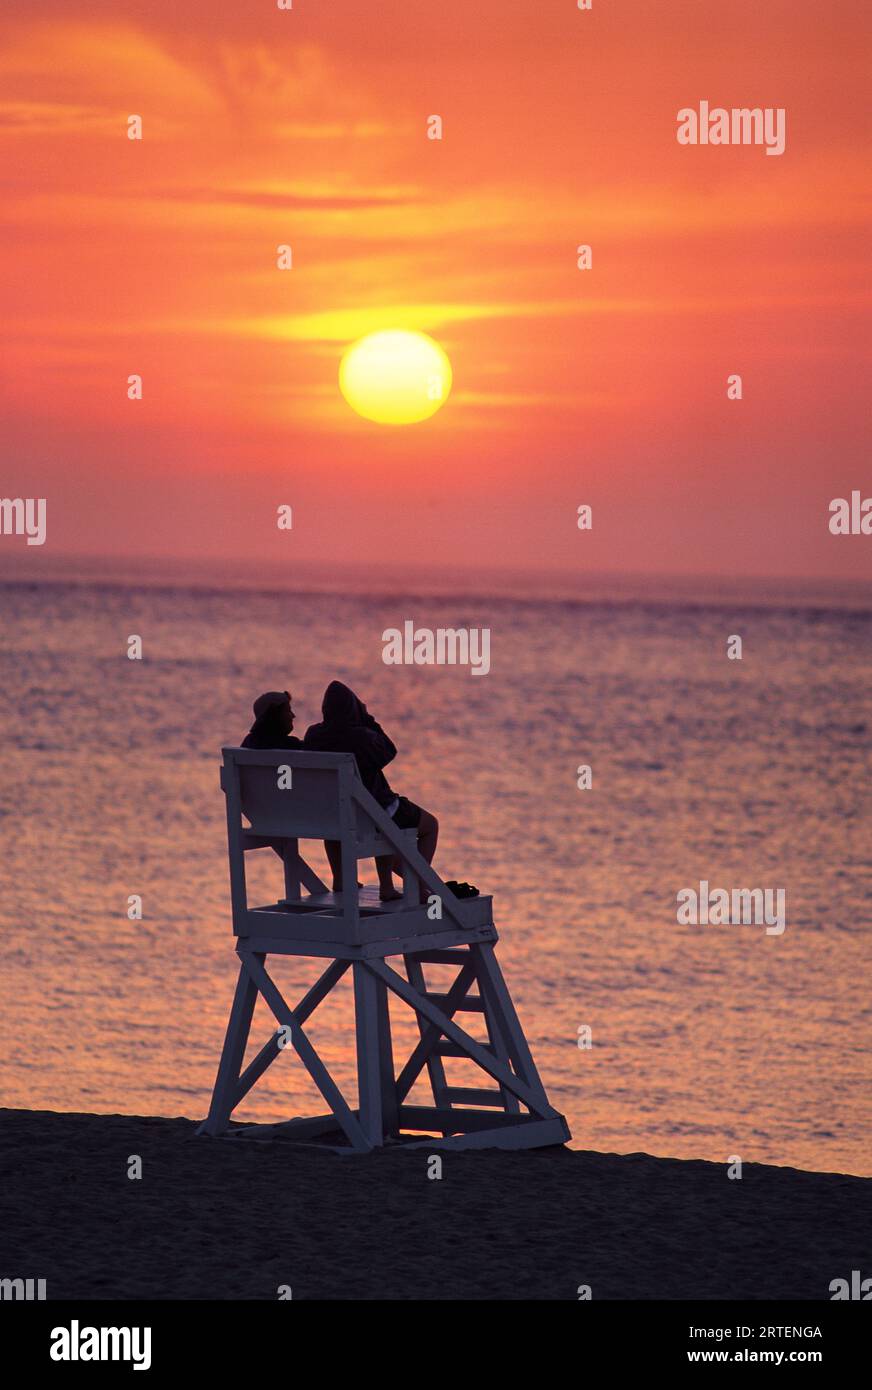 Pair of lifeguards watch the sunset at Race Point Beach, Cape Cod, Massachusetts, USA; Cape Cod, Massachusetts, United States of America Stock Photo